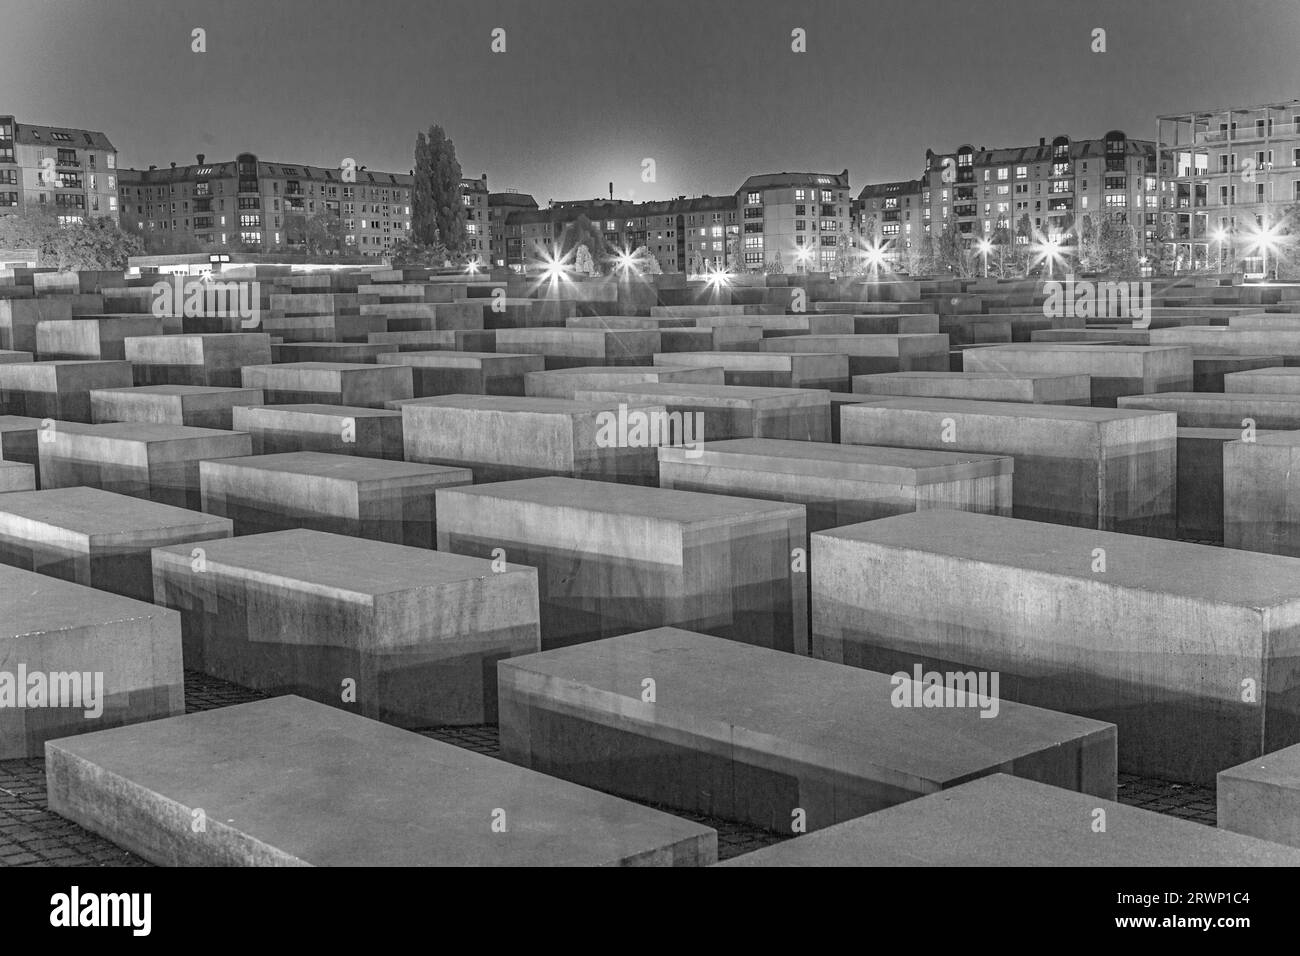 Berlin, Germany - October 27, 2014: The Holocaust monument in Berlin, Germany. It consist of 2711 concrete blocks whit different highs and parallel al Stock Photo